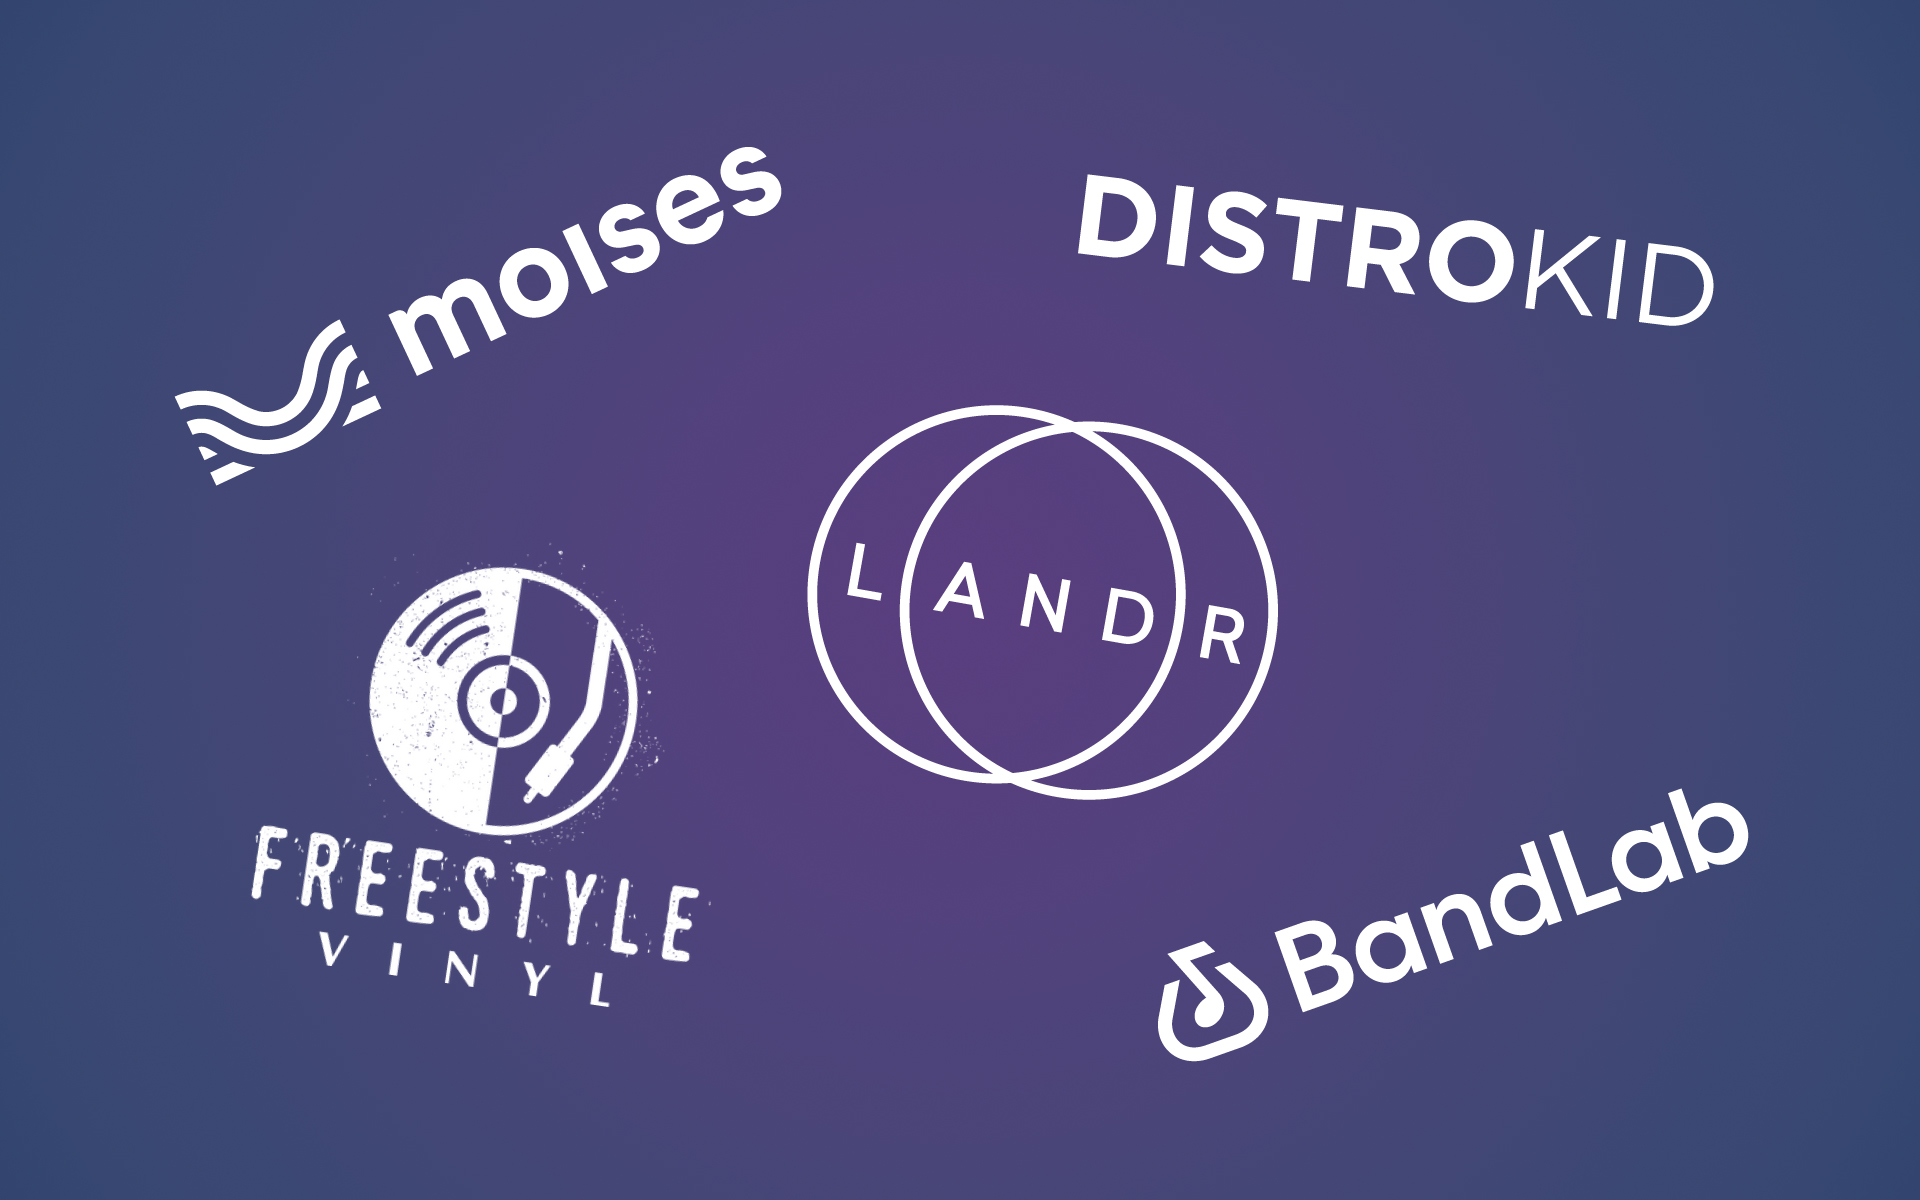 Logos for the following music technology companies are shown: Moises.ai, DistroKid, Freestyle Vinyl, LANDR, and BandLab.